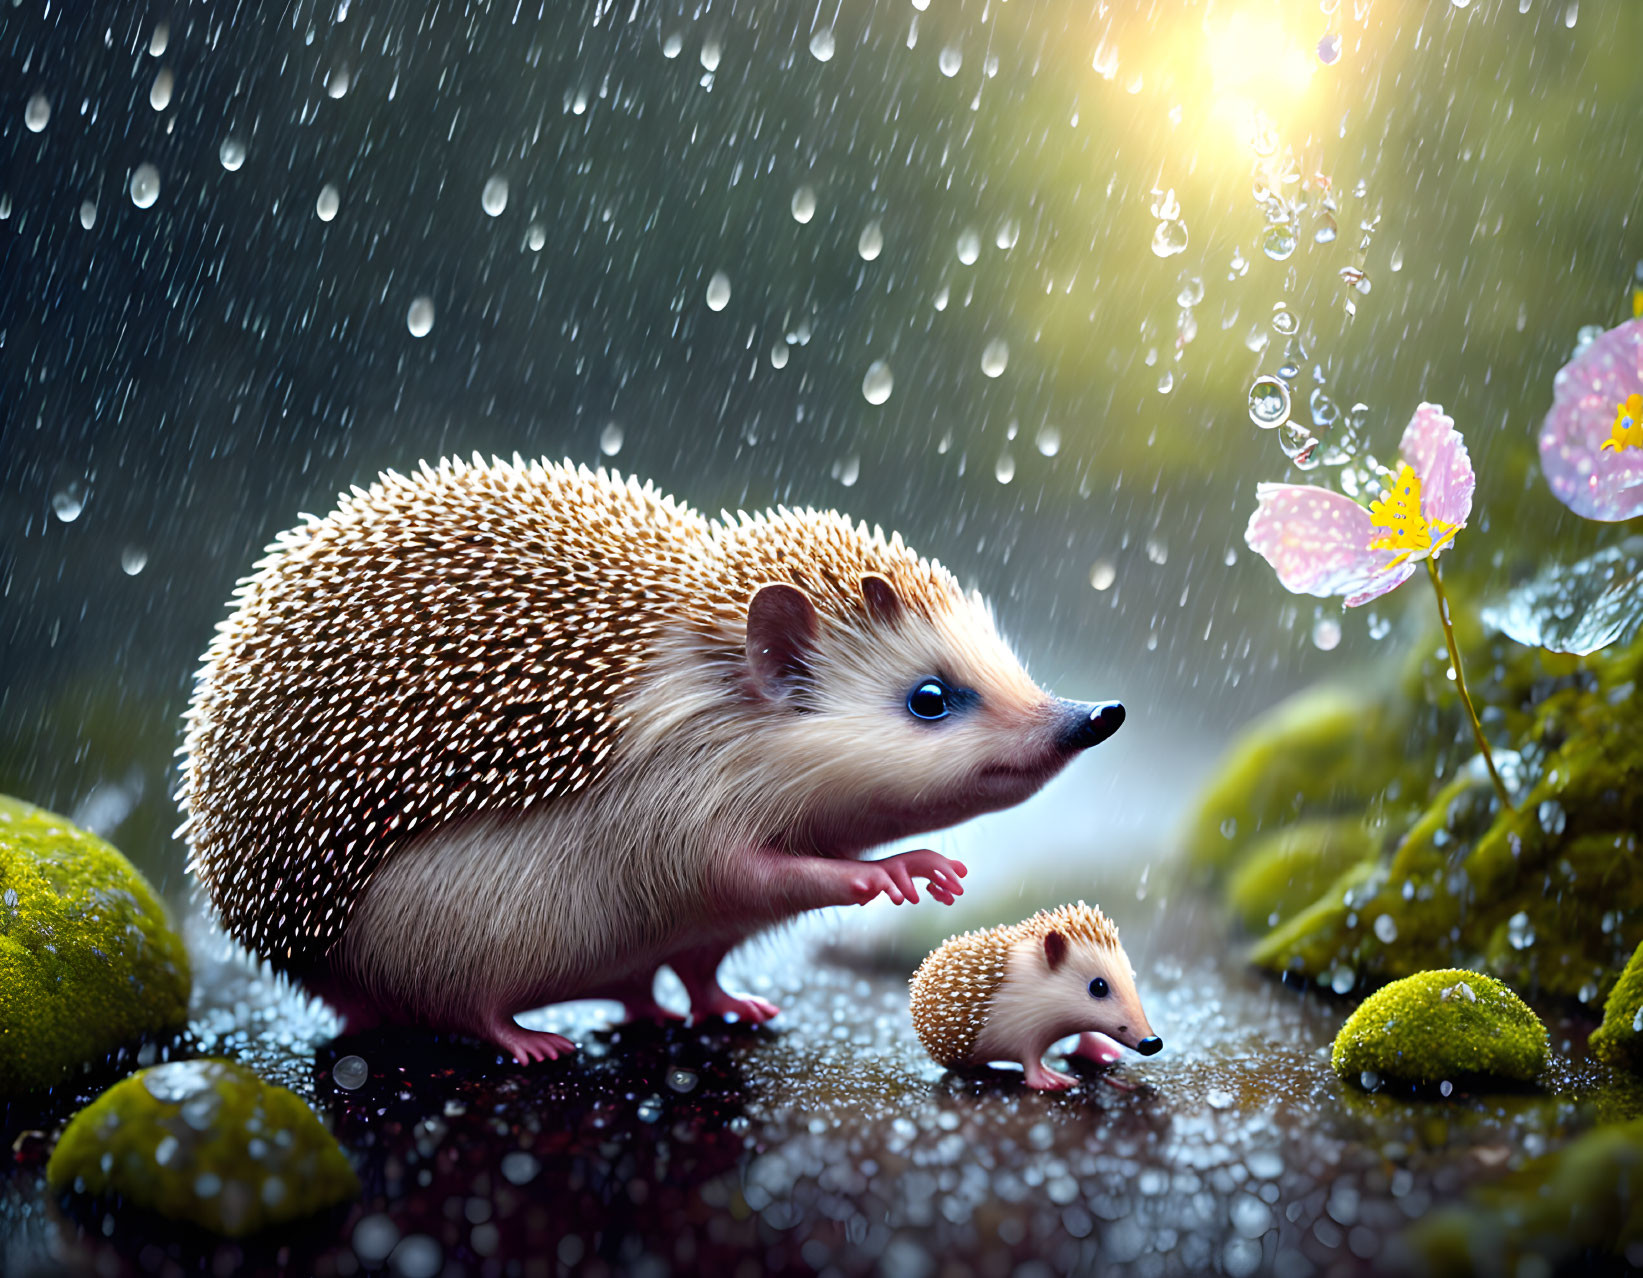 I and my son in a dream that I was a hedgehog.